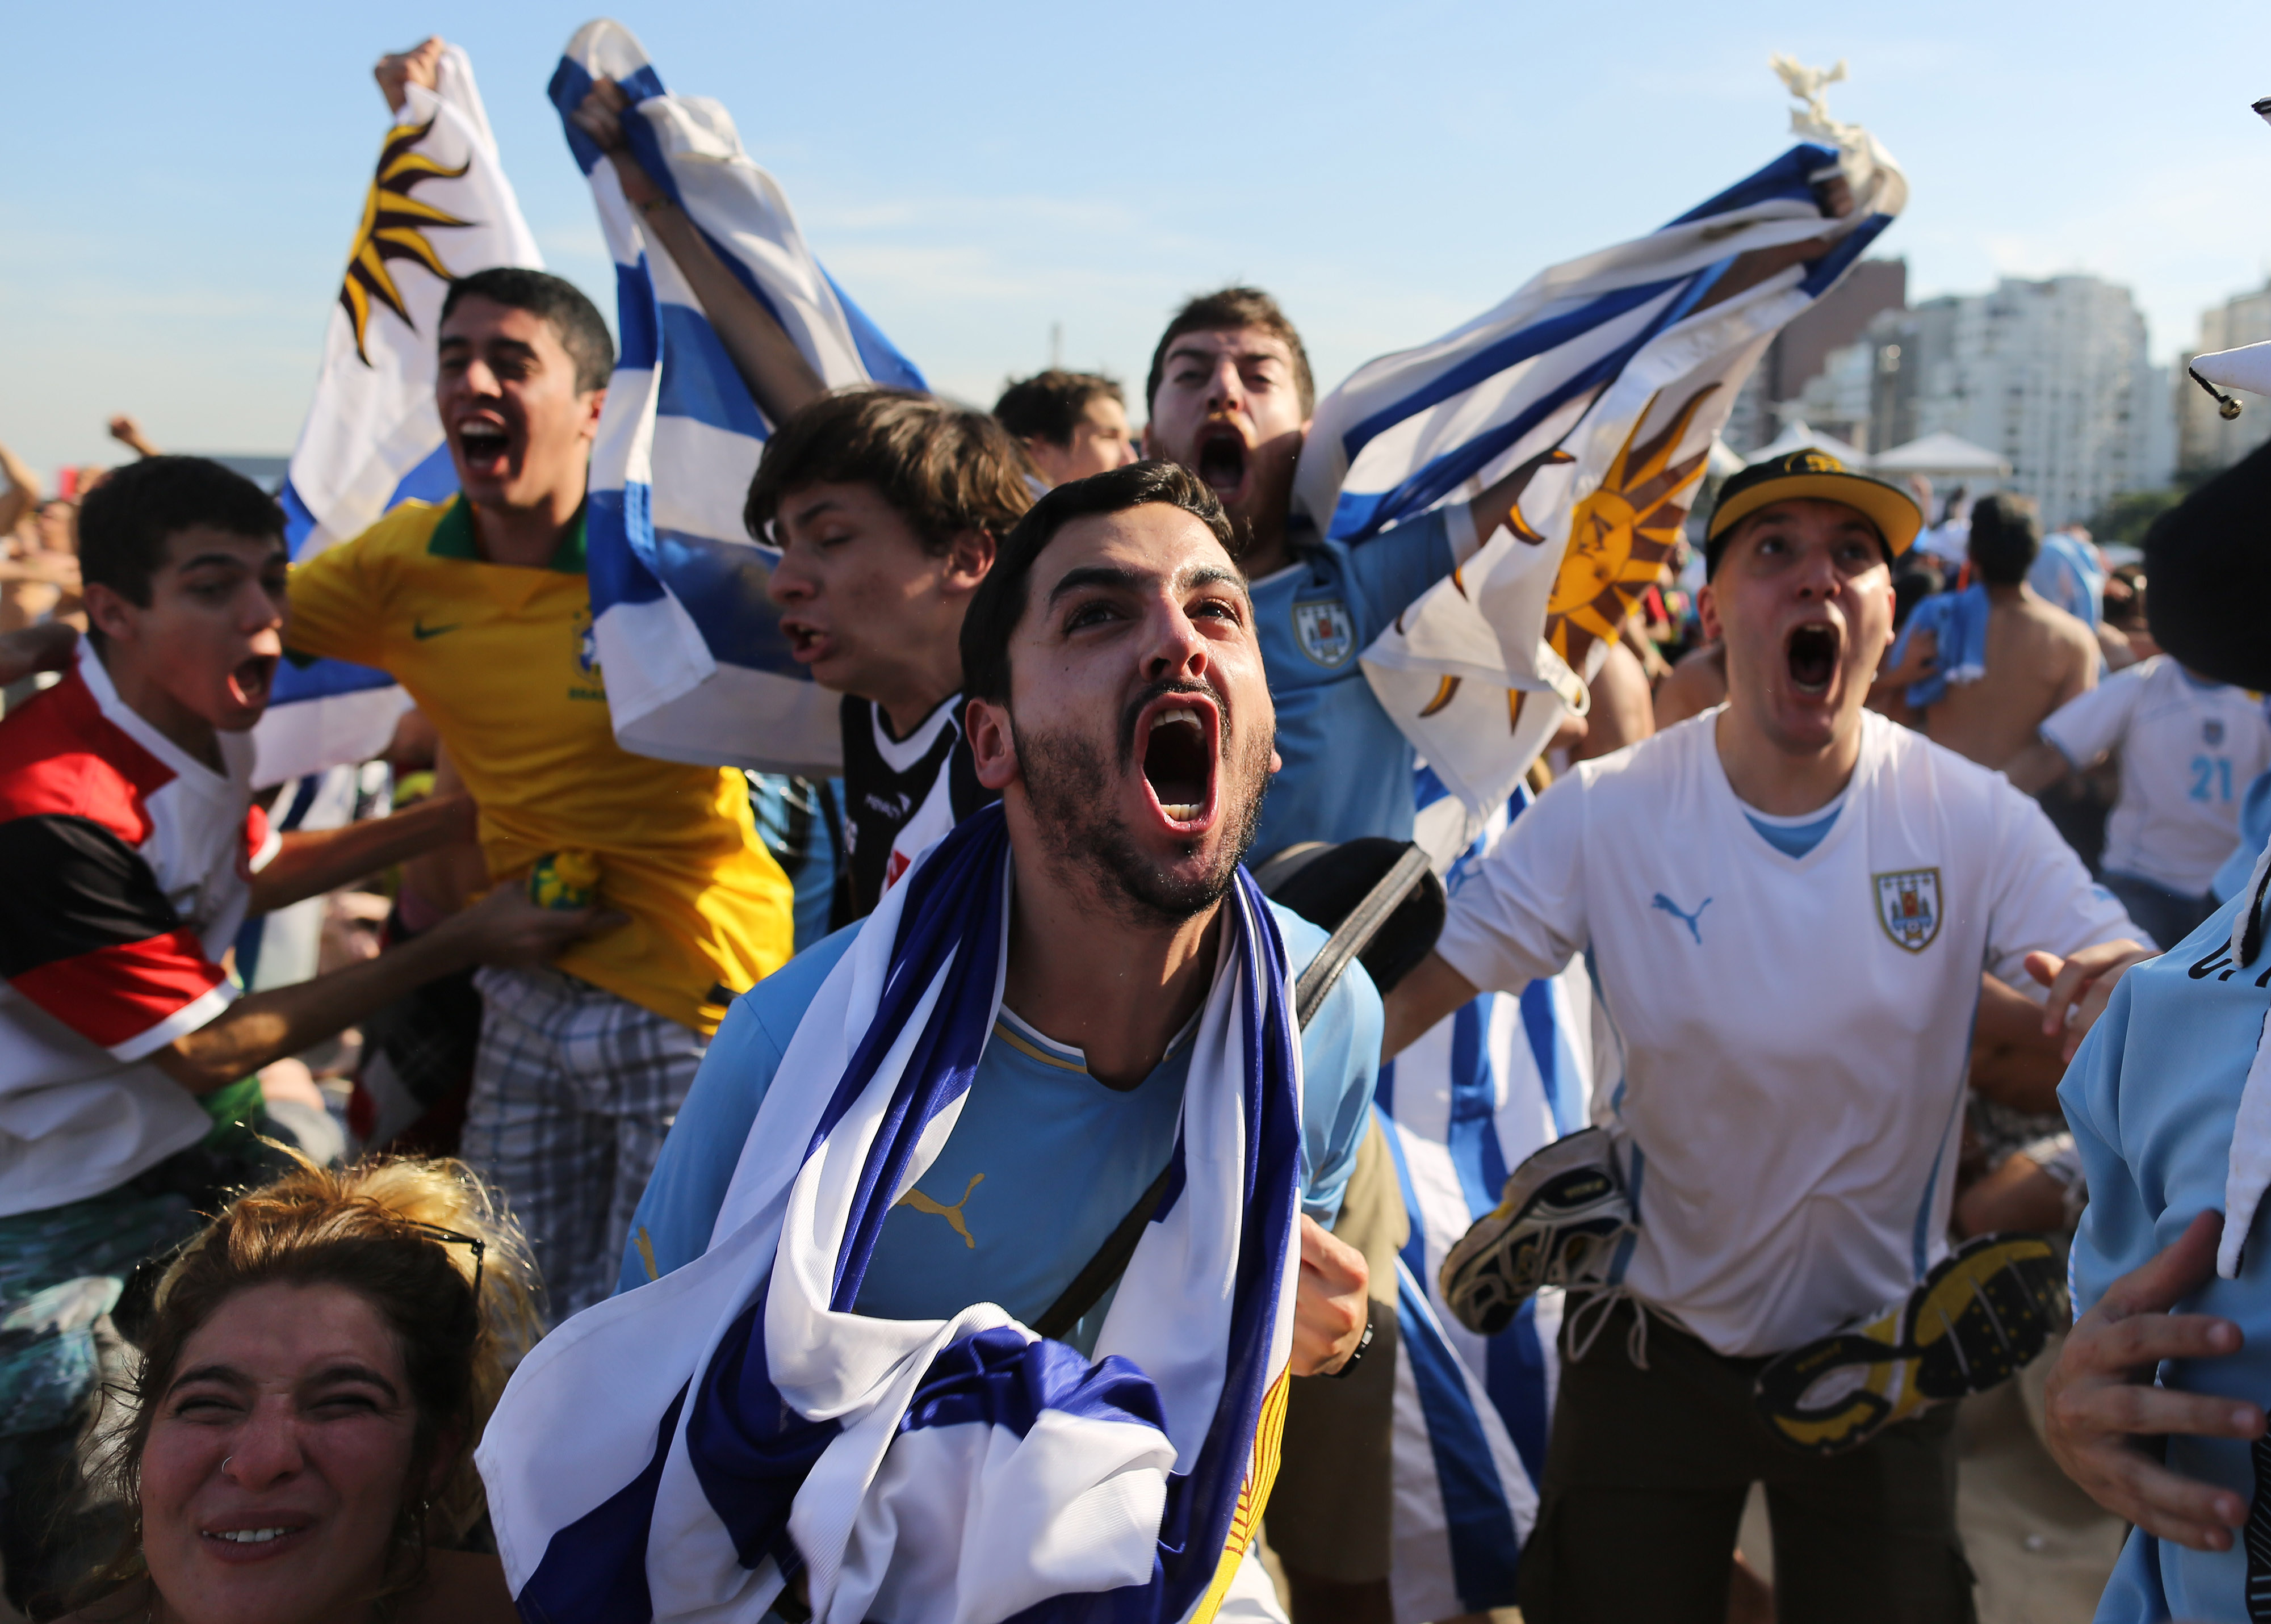 Fange Duke overraskelse Screaming, Cheering, Crying: Soccer Fans During The World Cup | Time